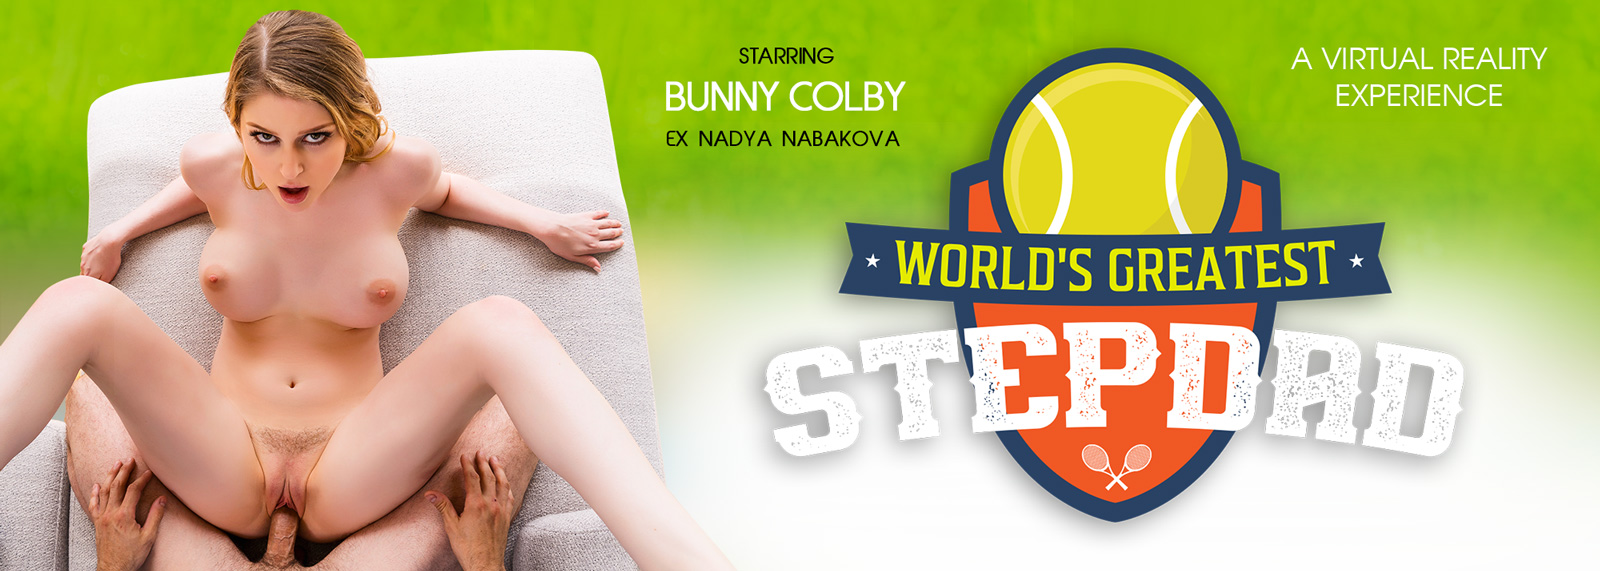 World's Greatest Stepdad - VR Porn Video, Starring: Bunny Colby